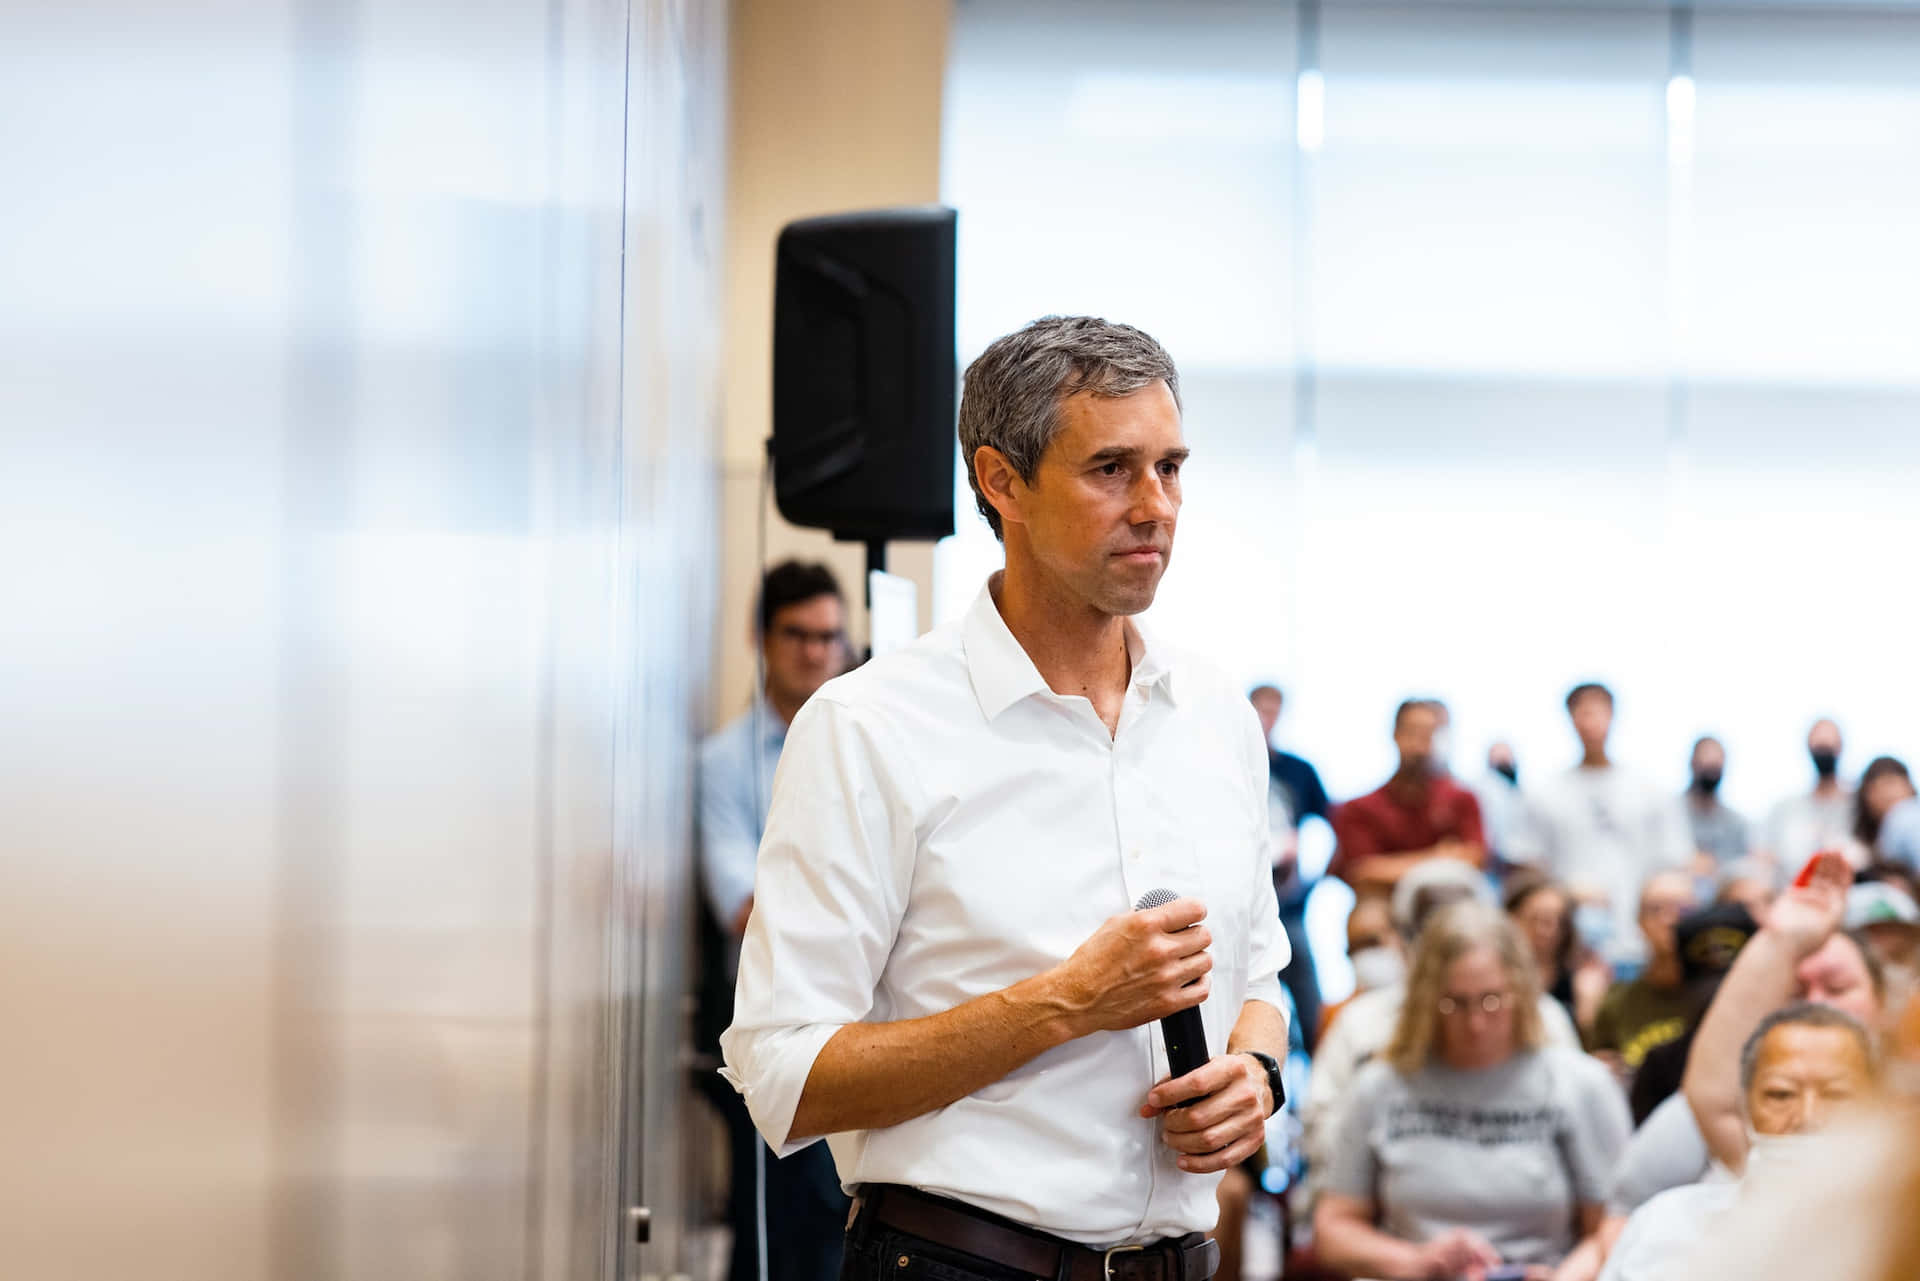 Robert O'rourke During A Public Speaking Event Wallpaper